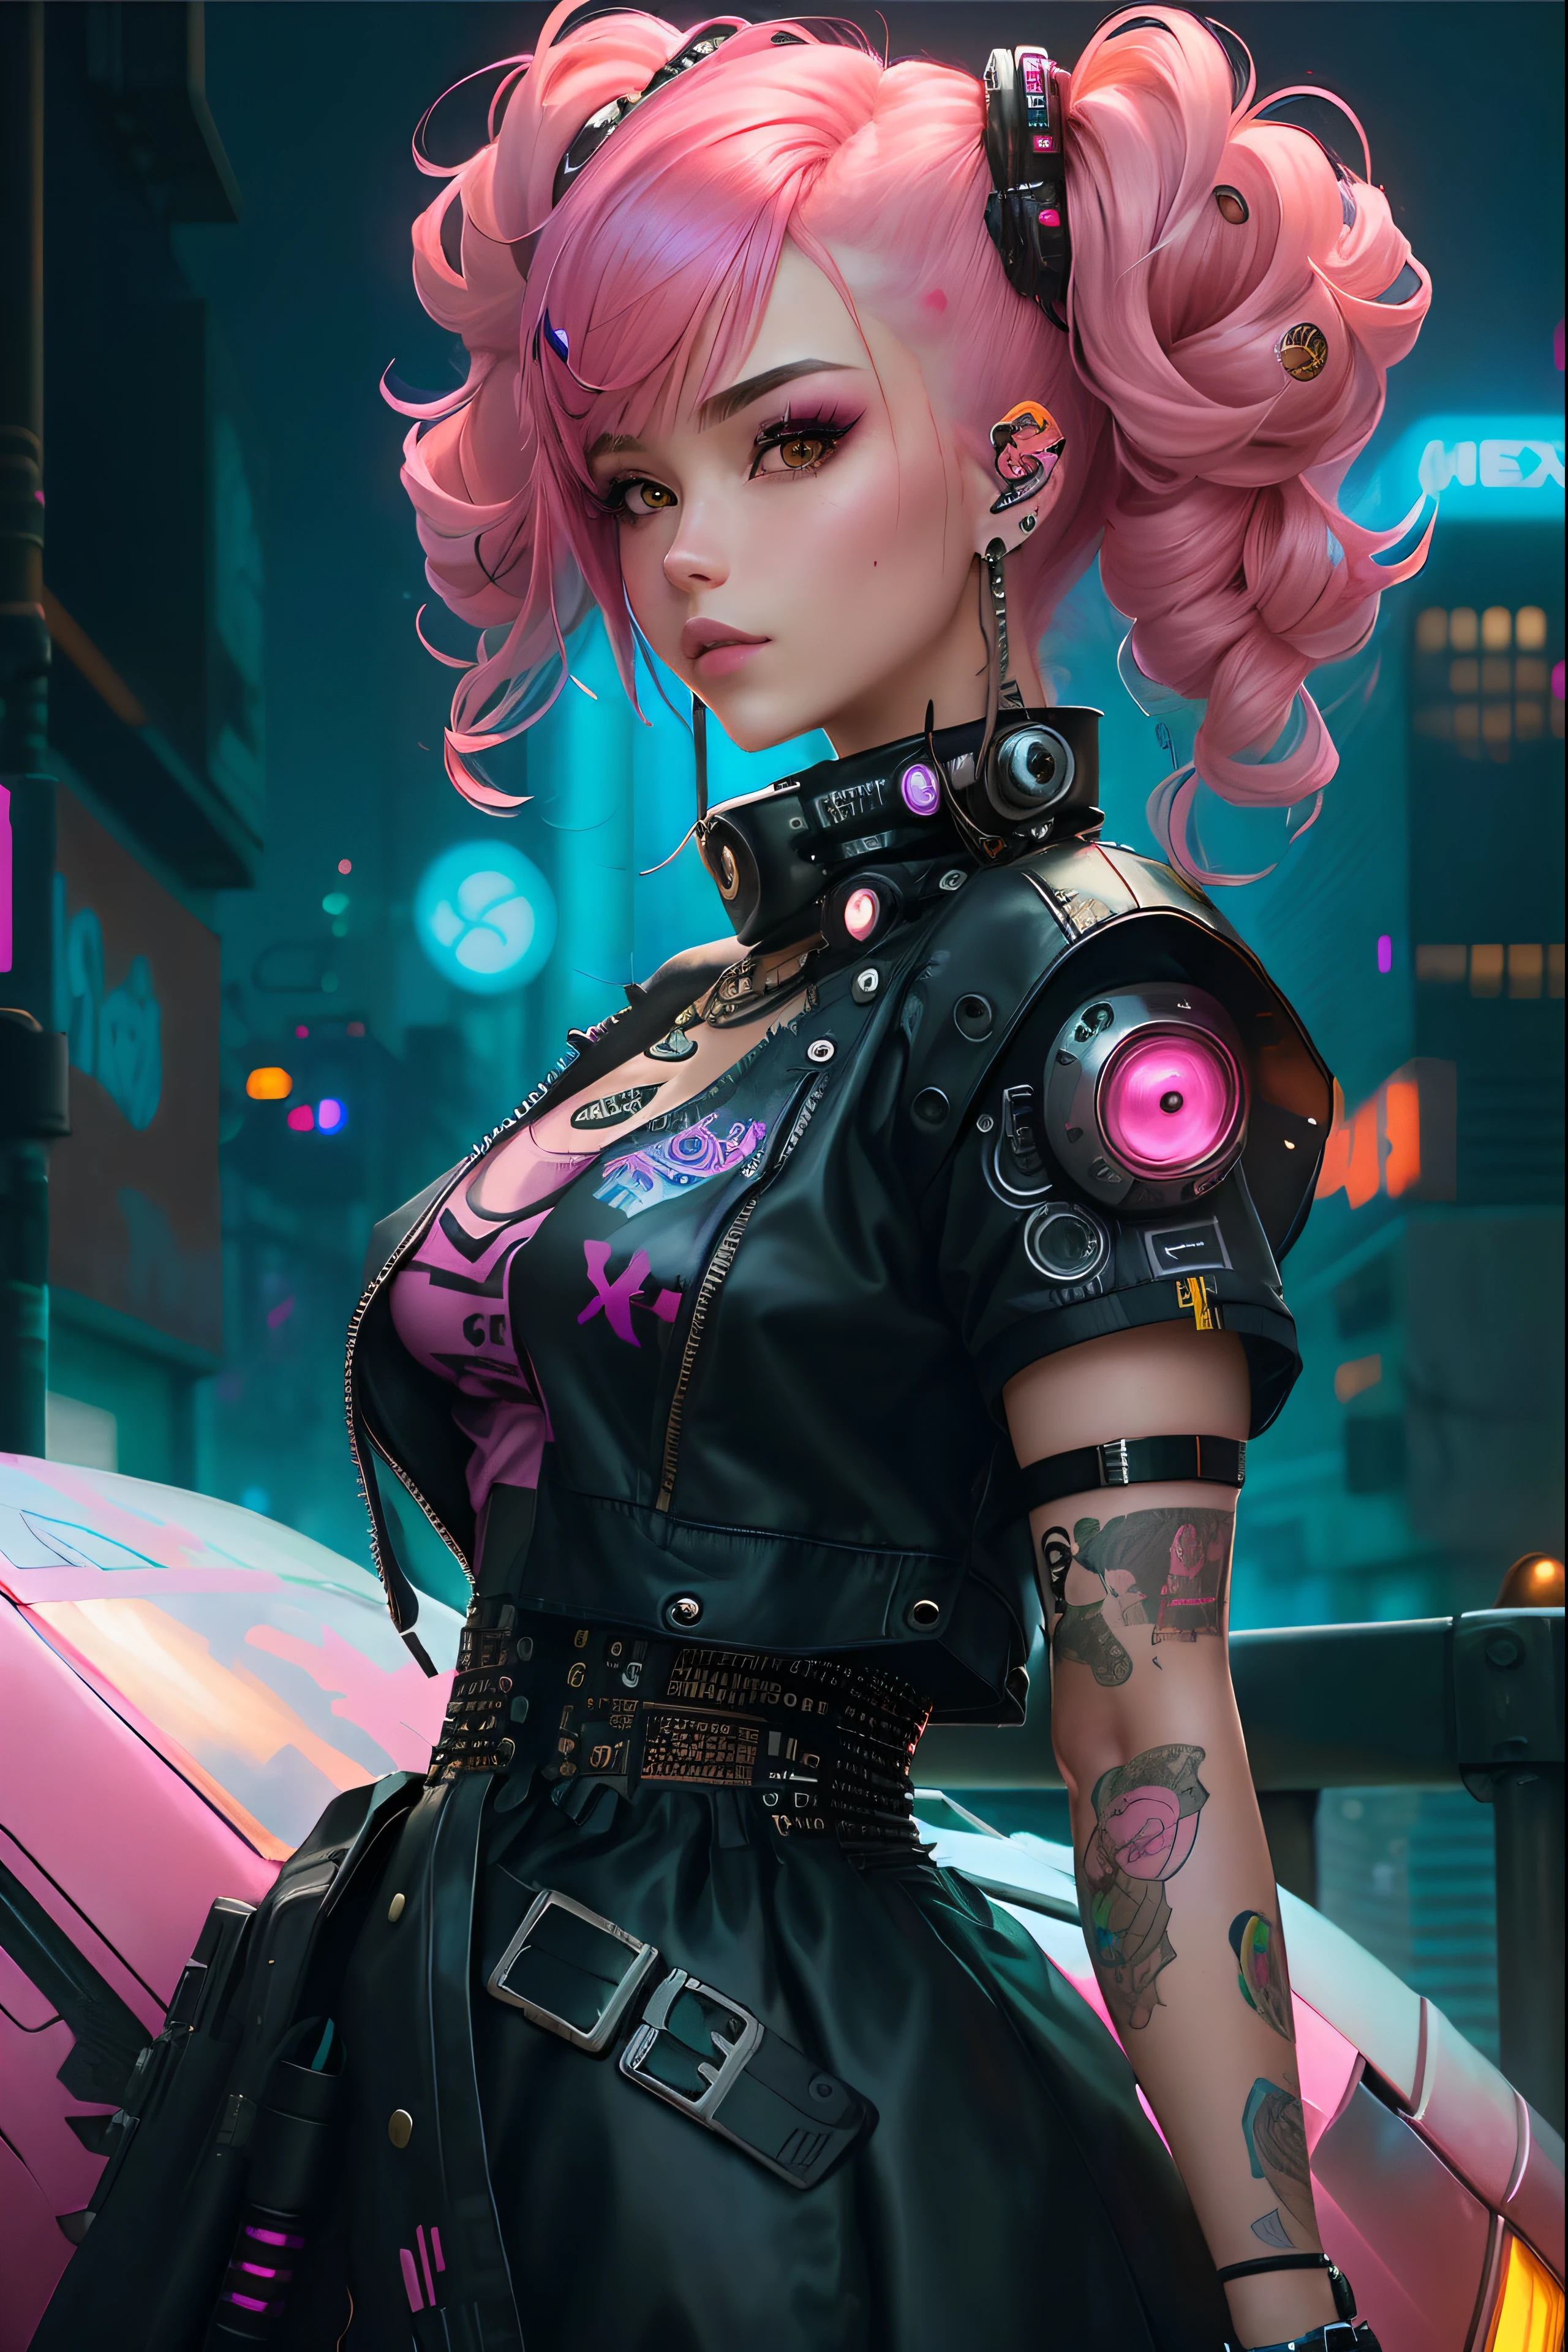 A close-up of a woman with pink hair and a pink wig, works of art in the style of guweiz, dreamy cyberpunk girl, cyberpunk art style, Cyberpunk anime girl, Anime Arte cyberpunk, alice in wonderland cyberpunk, Hyperrealistic cyberpunk style, Digital Cyberpunk - Arte Anime, cyberpunk style, Cute girl with short pink hair, Cyberpunk anime girly girl